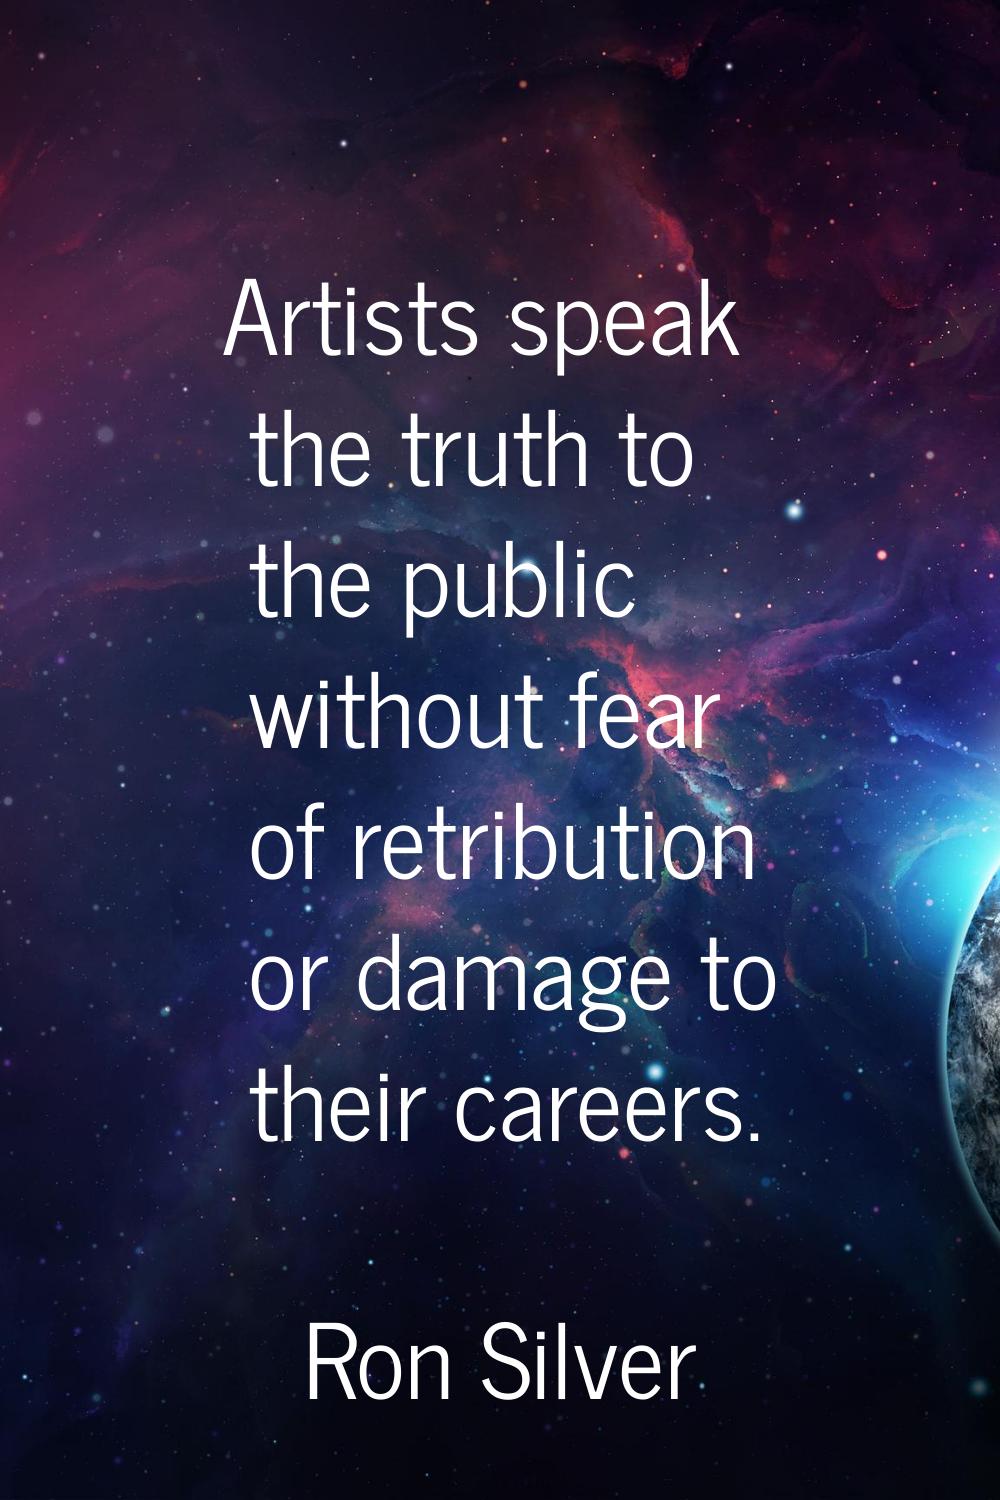 Artists speak the truth to the public without fear of retribution or damage to their careers.